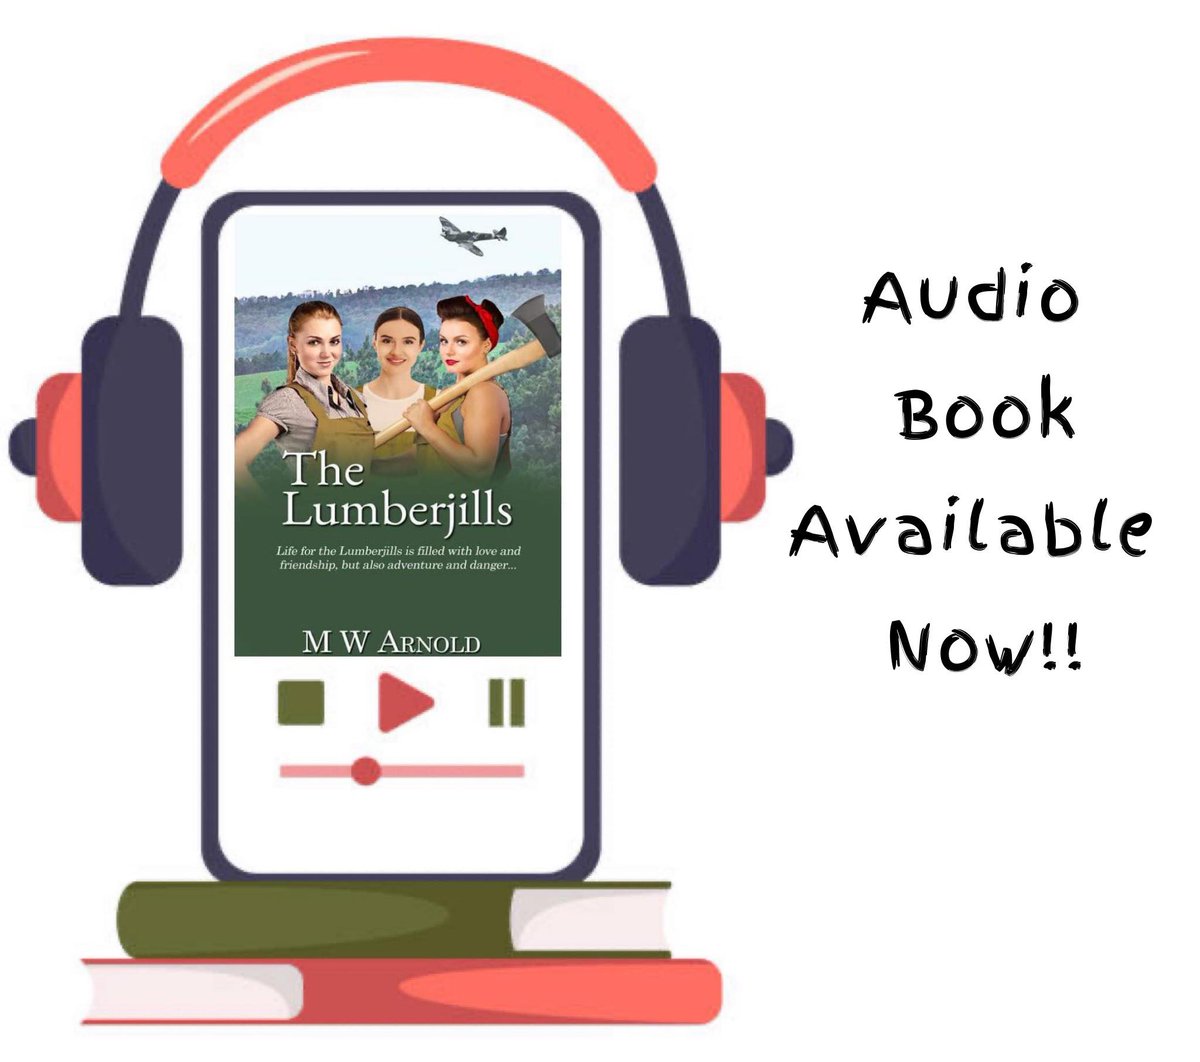 “There is a strong sense of community and family, and how vital these are when you never know what will happen next.” Review of ‘The Lumberjills’ by @KittyKatAuthor mybook.to/TLJ1 #Historical #mystery #Romance #BookBoost #Audiobook @UlverscroftLtd @Isisaudio #audible